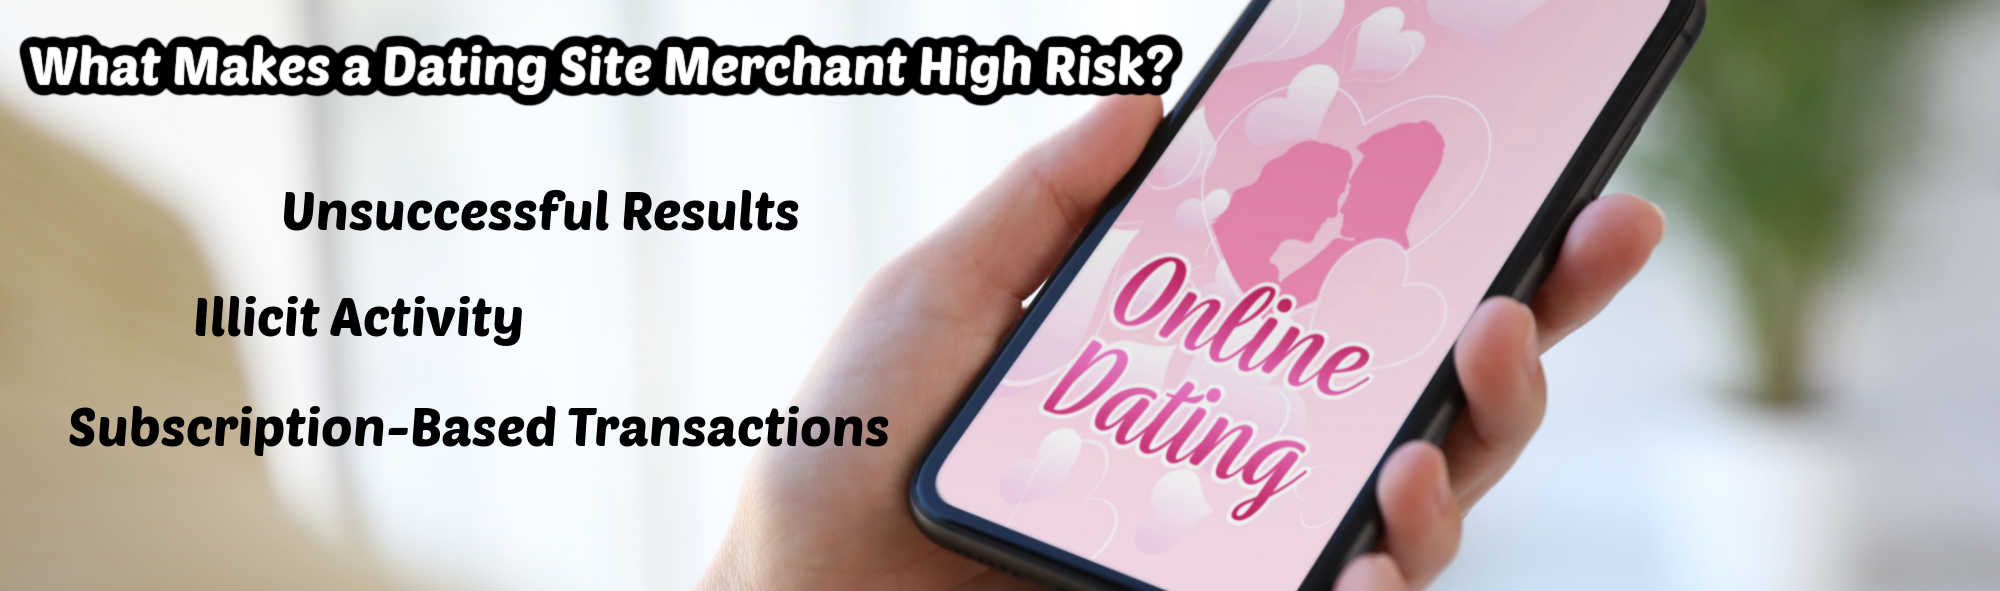 image of what makes dating site merchant high risk